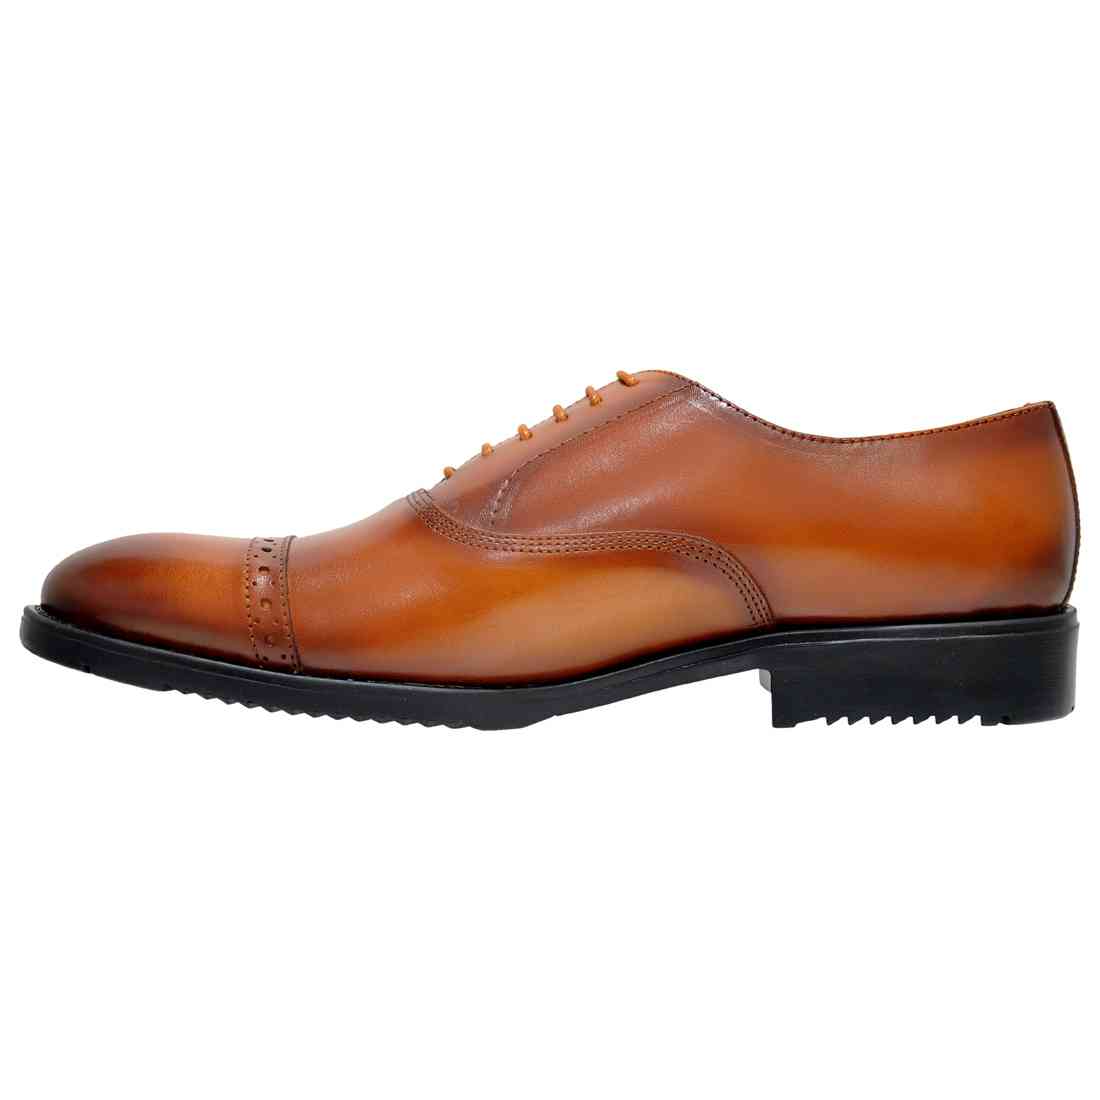 OHM New York Cap Toe Oxford Leather Shoes